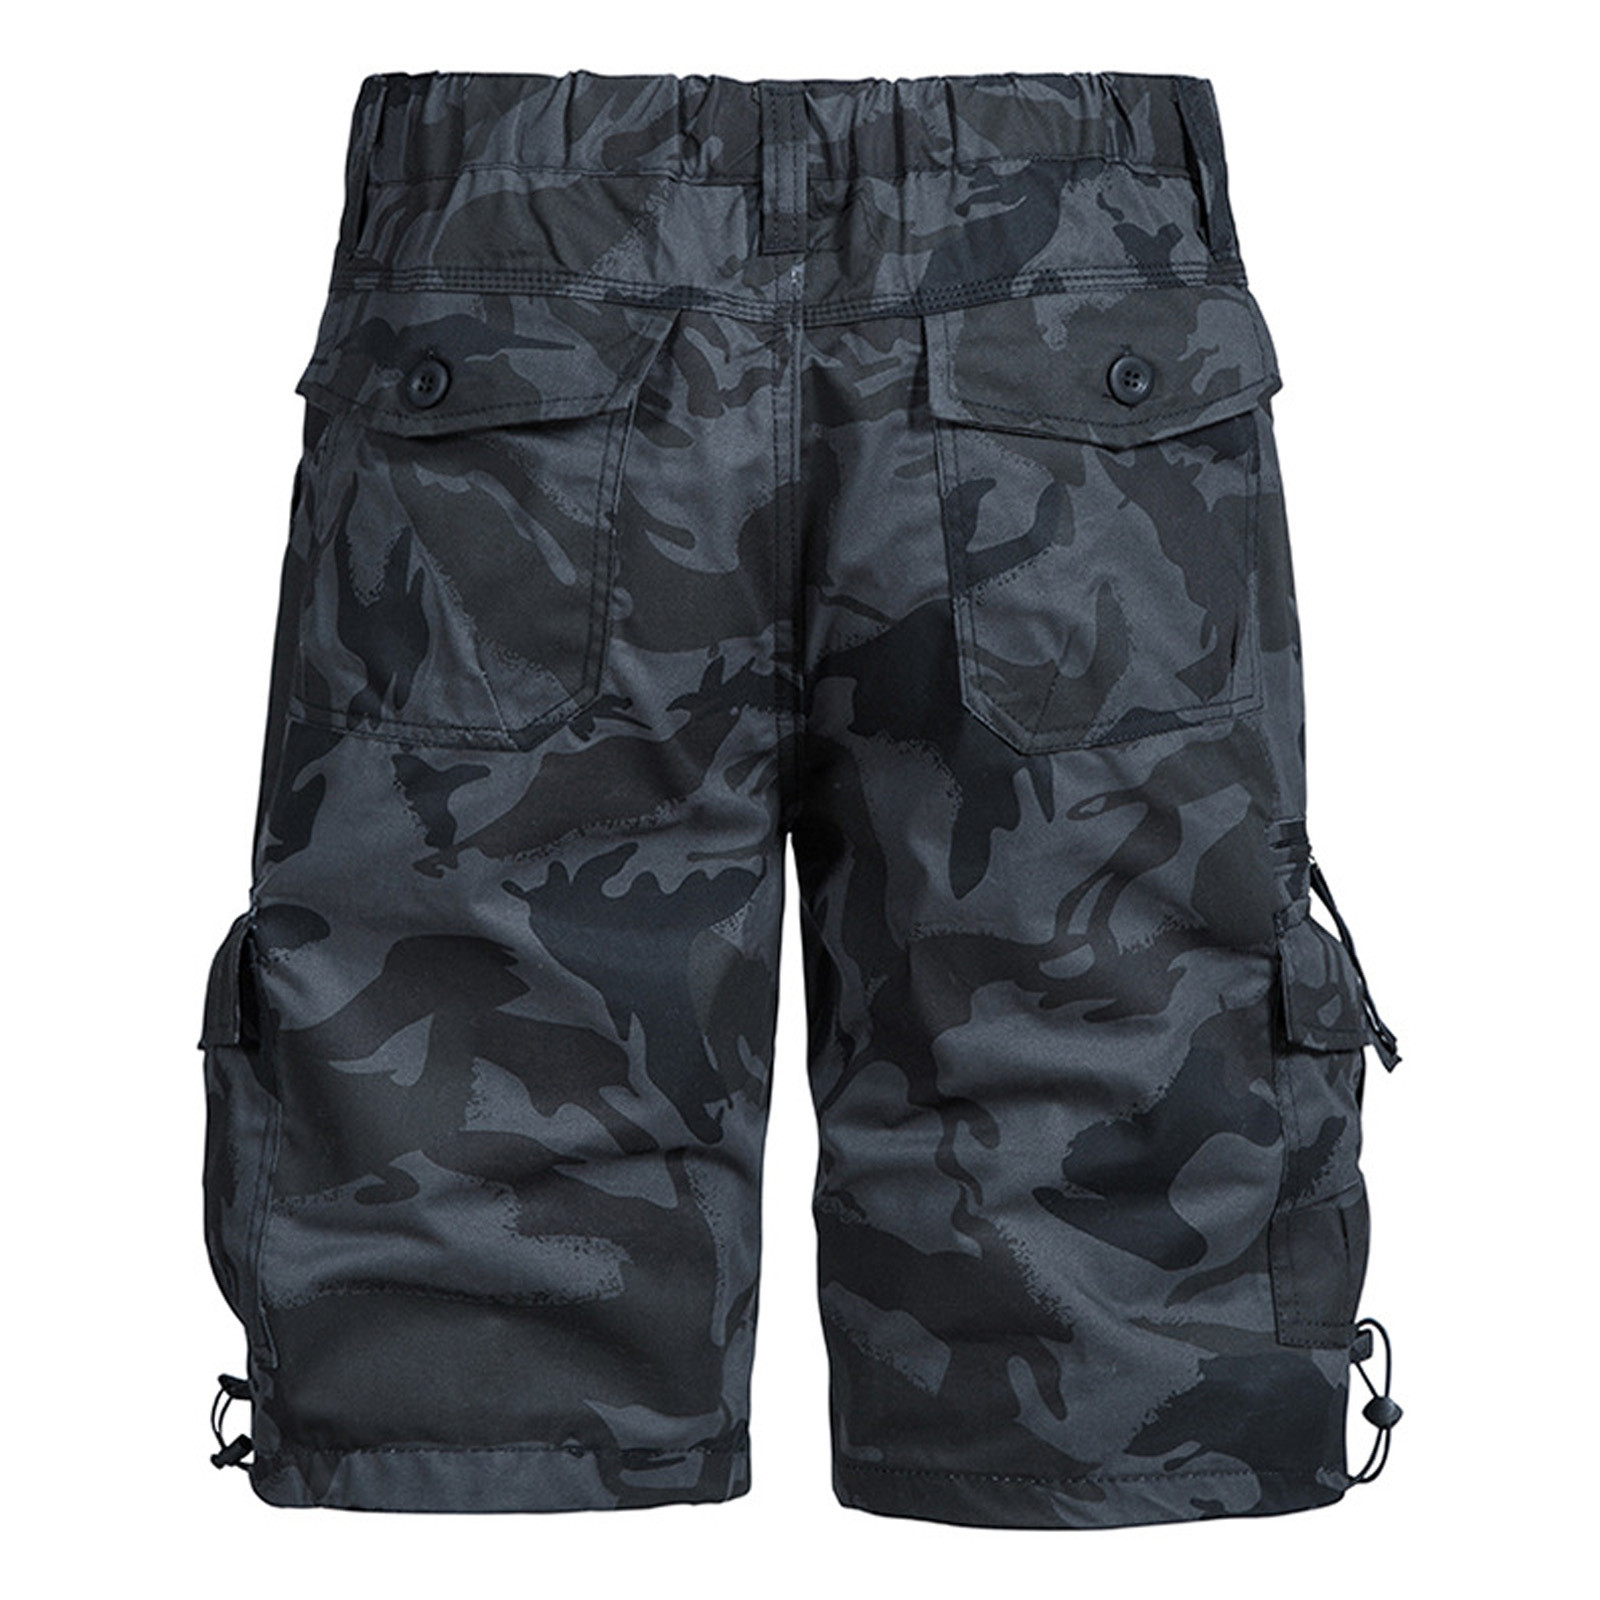 APEXFWDT Cargo Shorts for Men Big and Tall Camo Outdoor Military ...